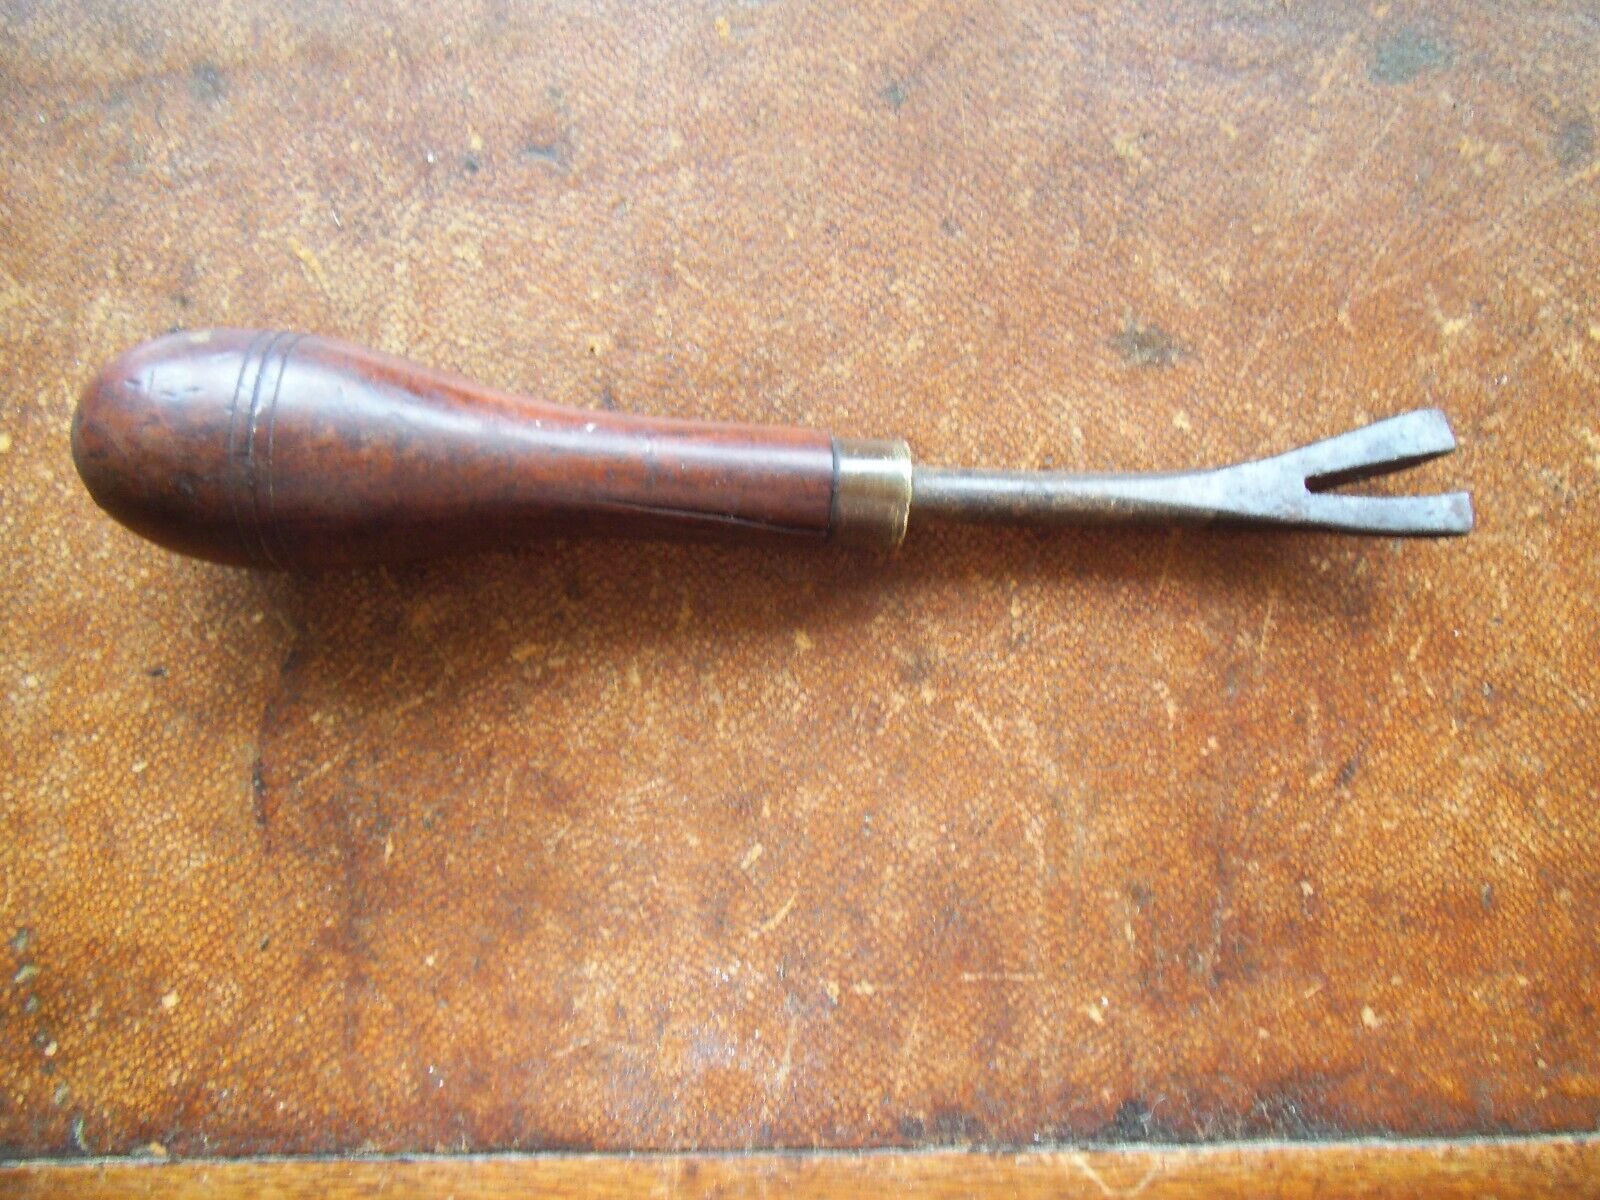 VINTAGE TACK REMOVER / LIFTER  / PULLER - VINTAGE UPHOLSTERY TOOL